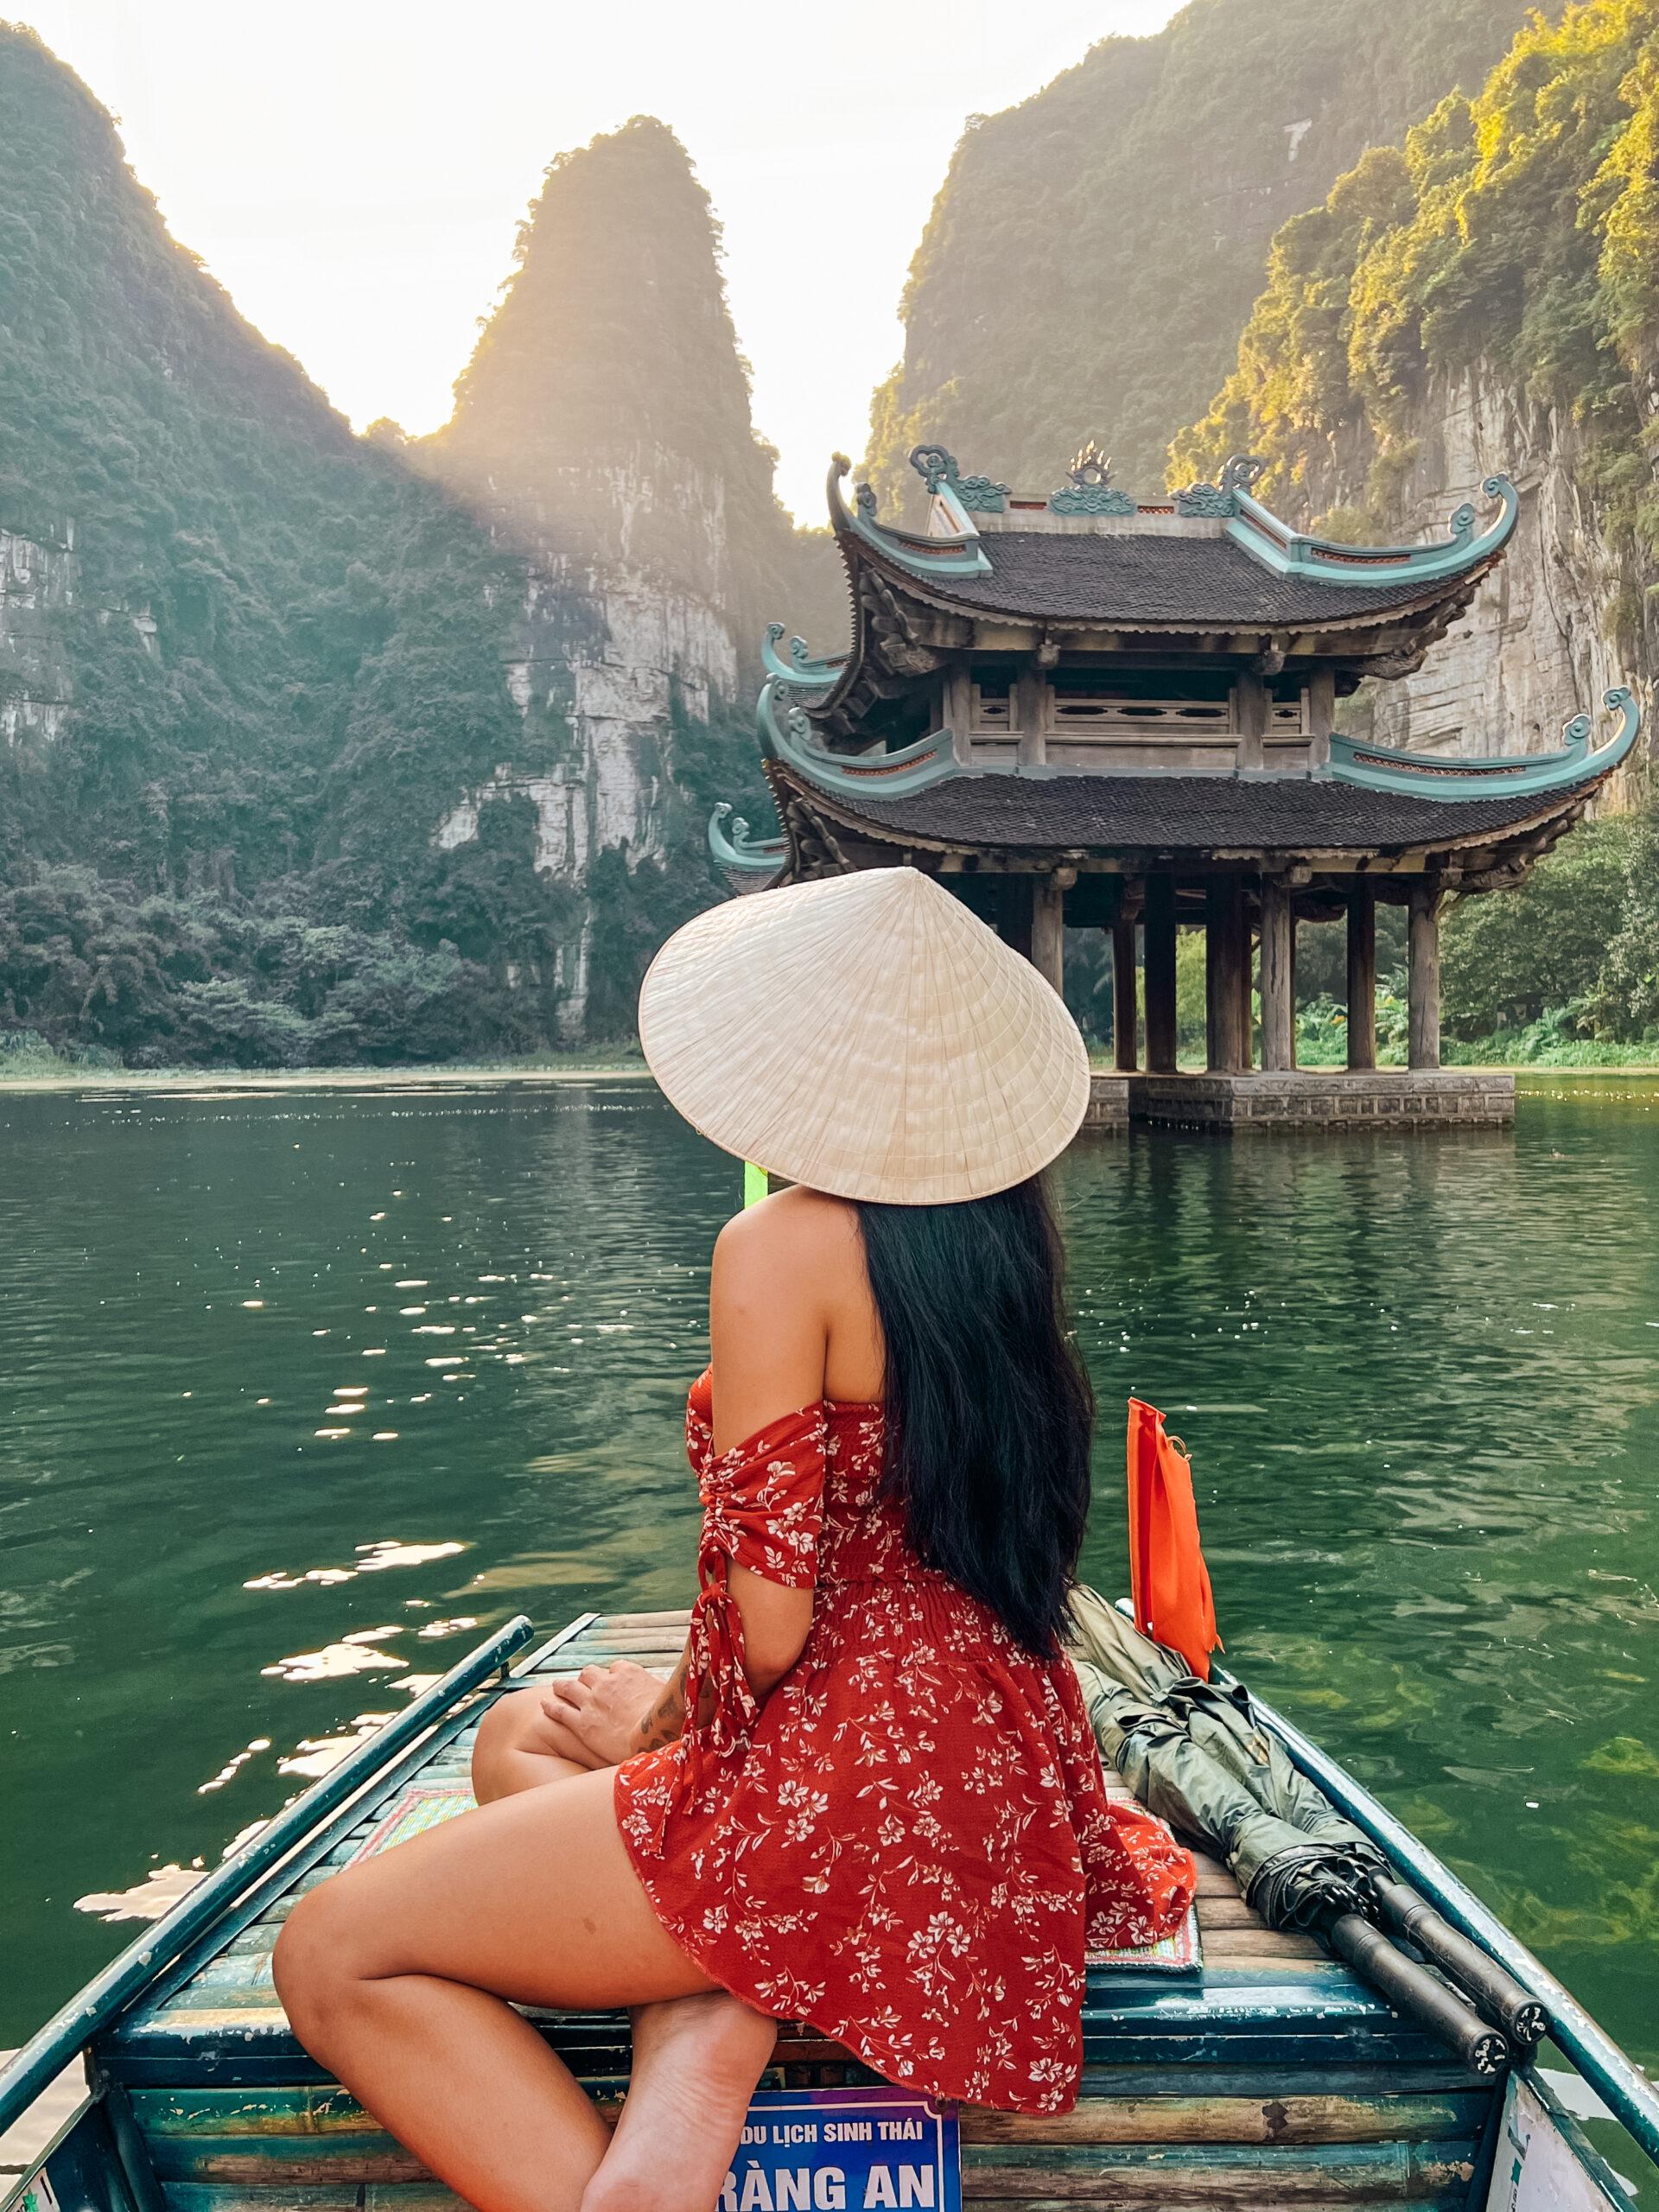 Vietnamese girl with a palm leaf hat on a boat in Trang An, Ninh Binh province, Vietnam.